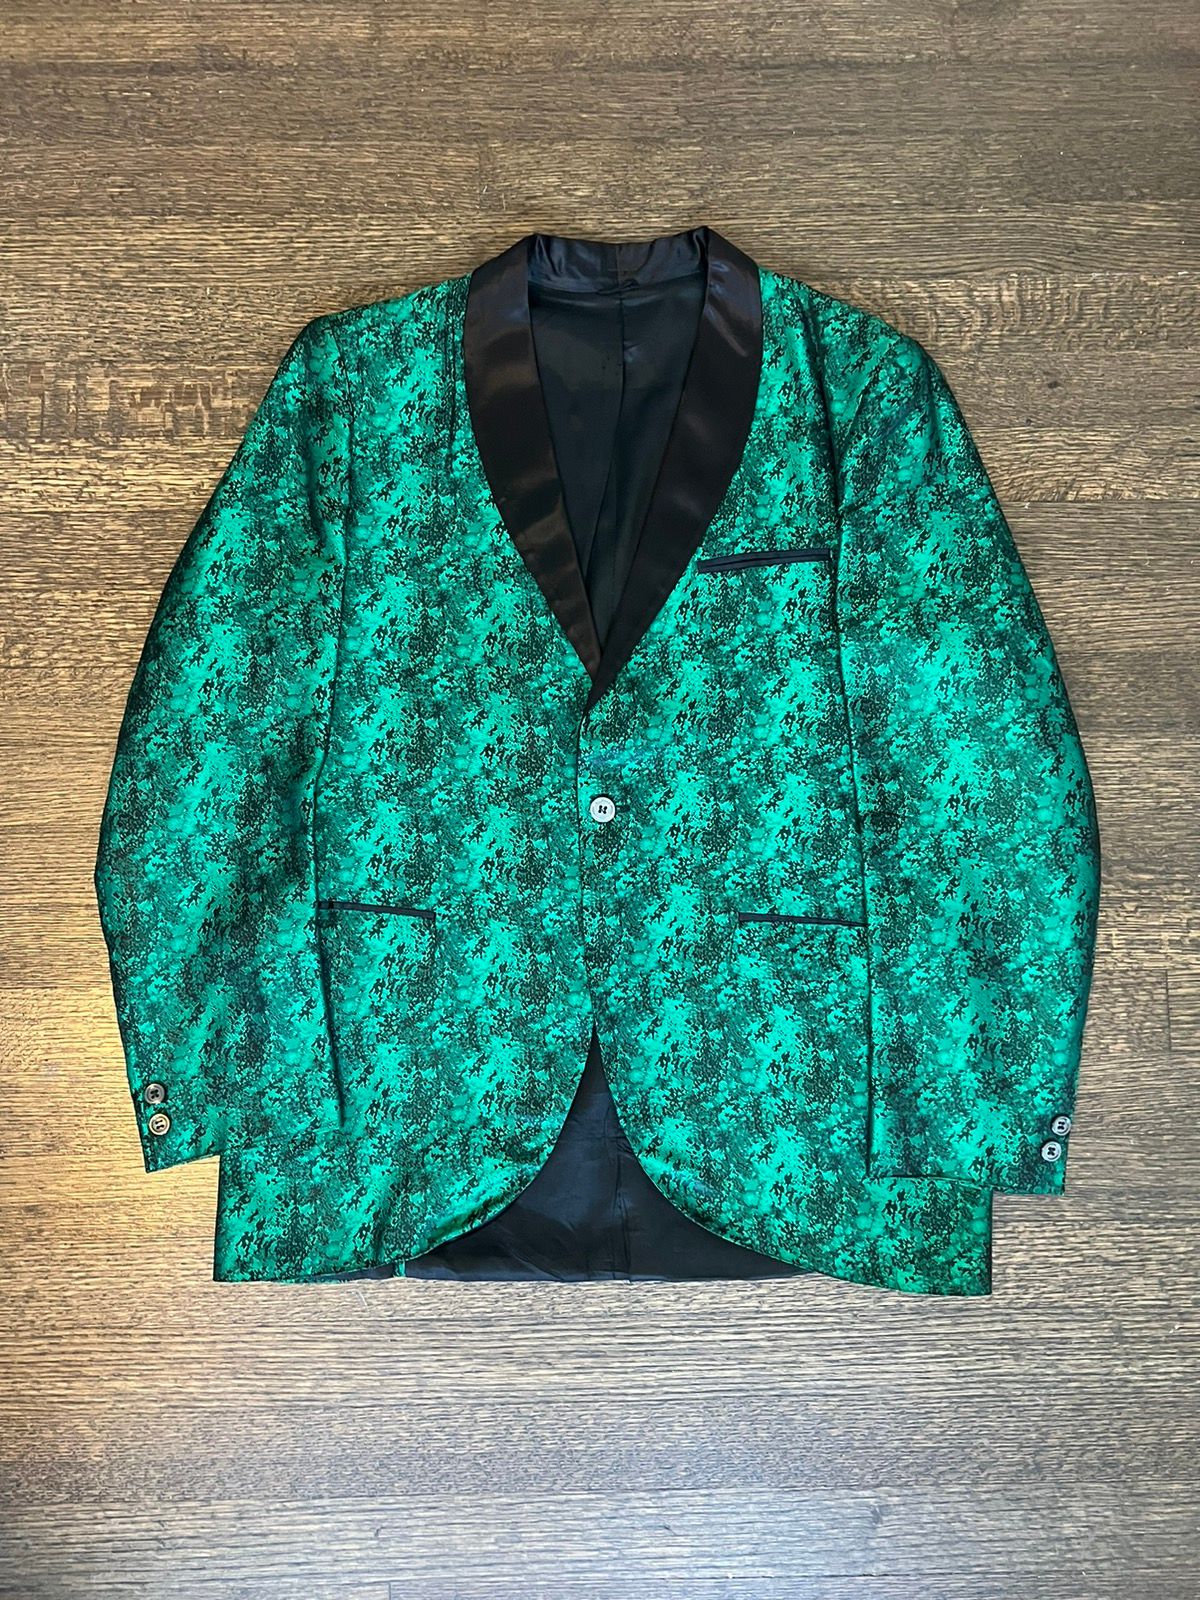 Vintage 70s Jacquard Dinner Jacket Tux Leisure suit smokers jacket Size 40S - 1 Preview